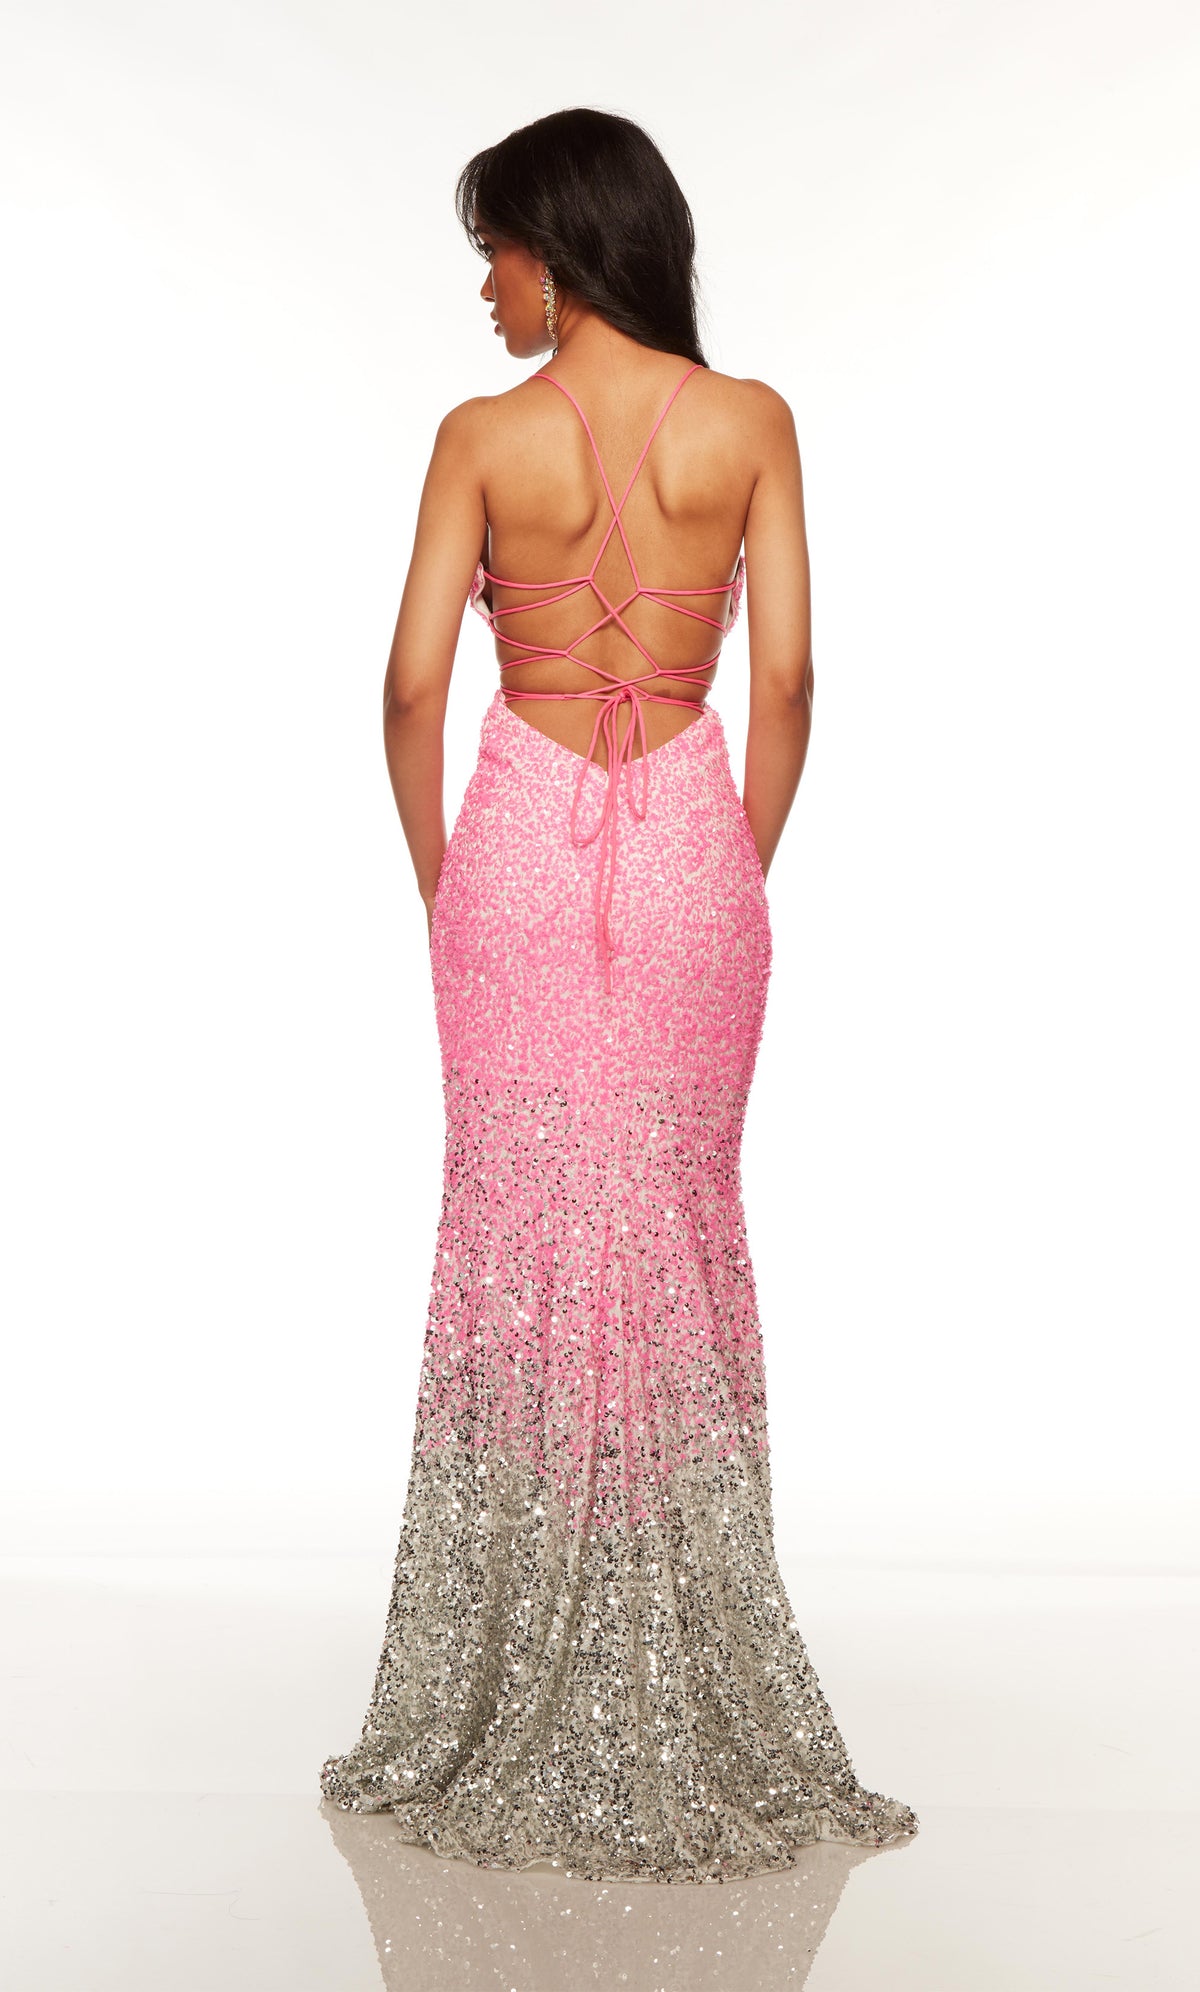 Fitted pink-silver ombre sequin prom dress with a strappy back.